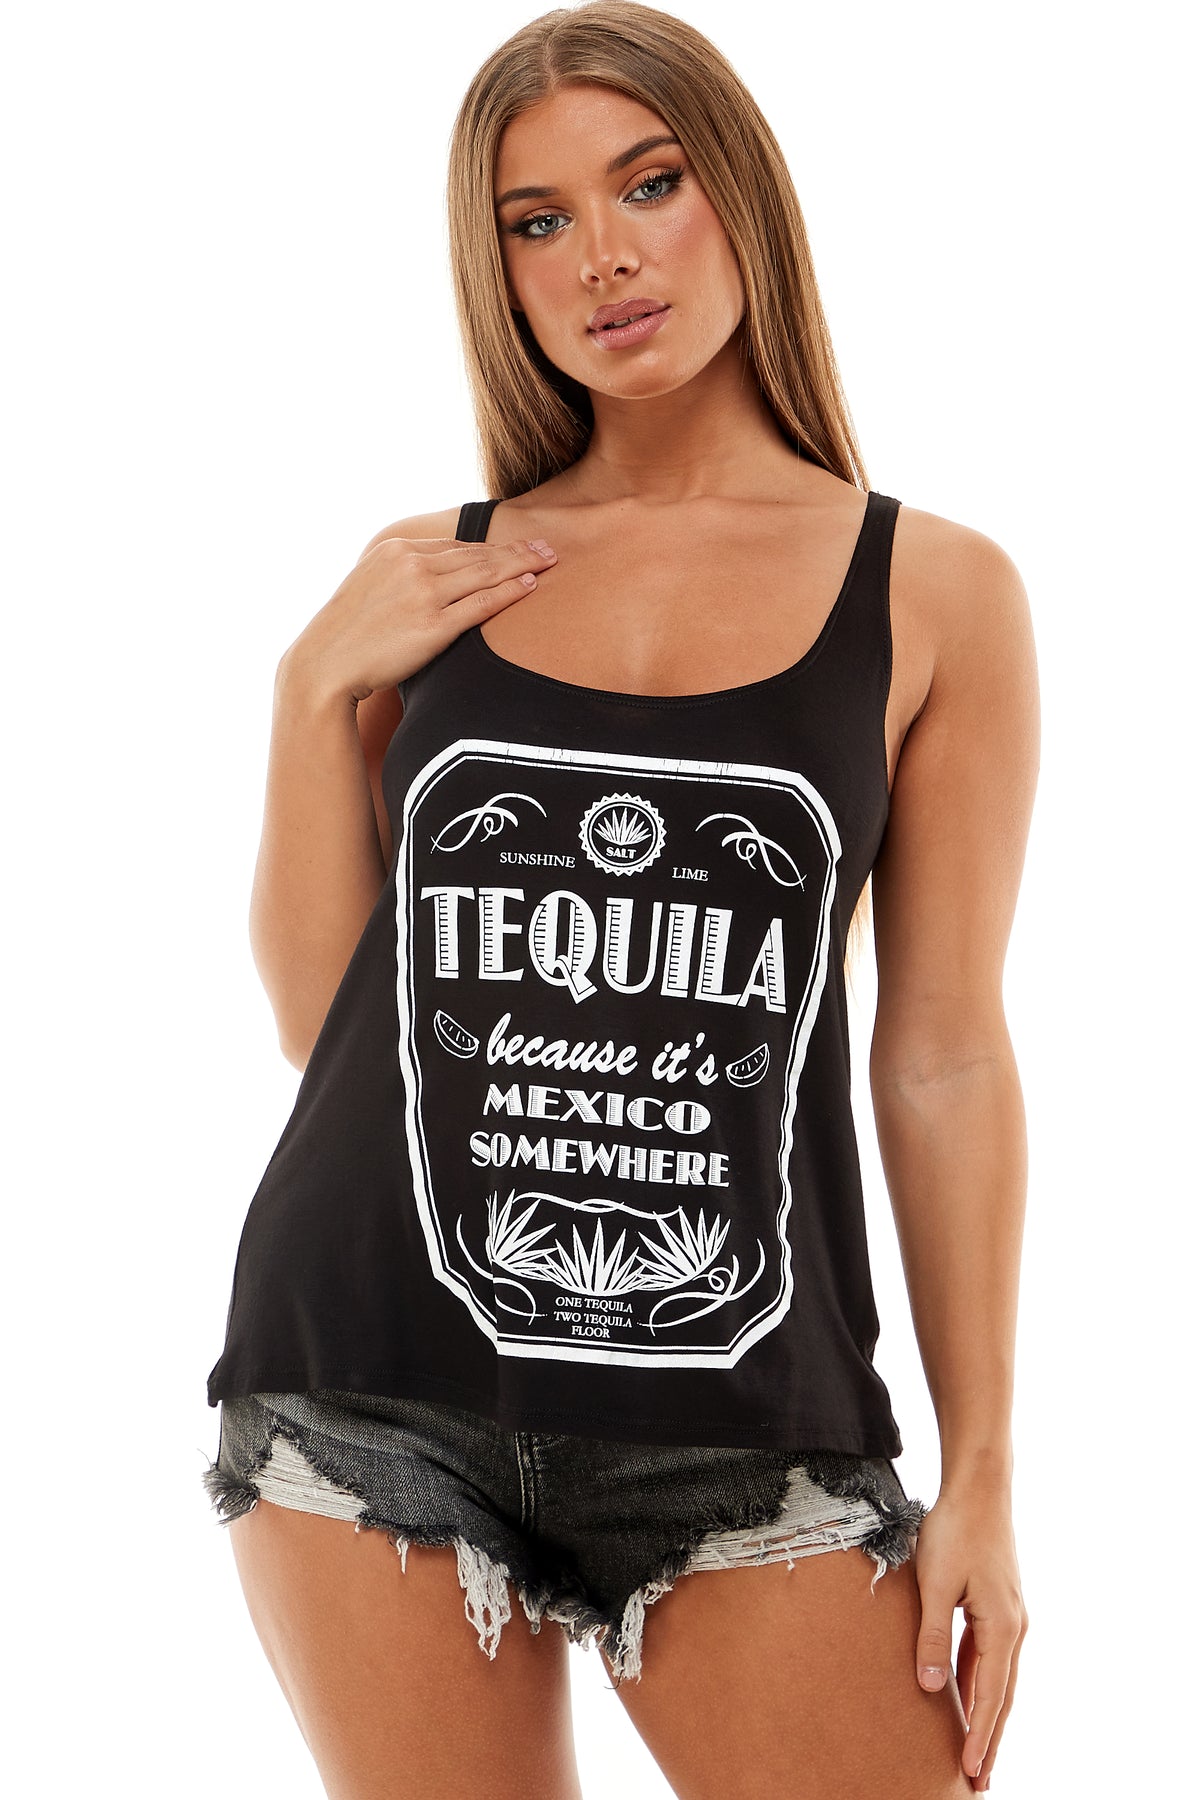 TEQUILA BECAUSE IT'S MEXICO SOMEWHERE TANK TOP – Trailsclothing.com